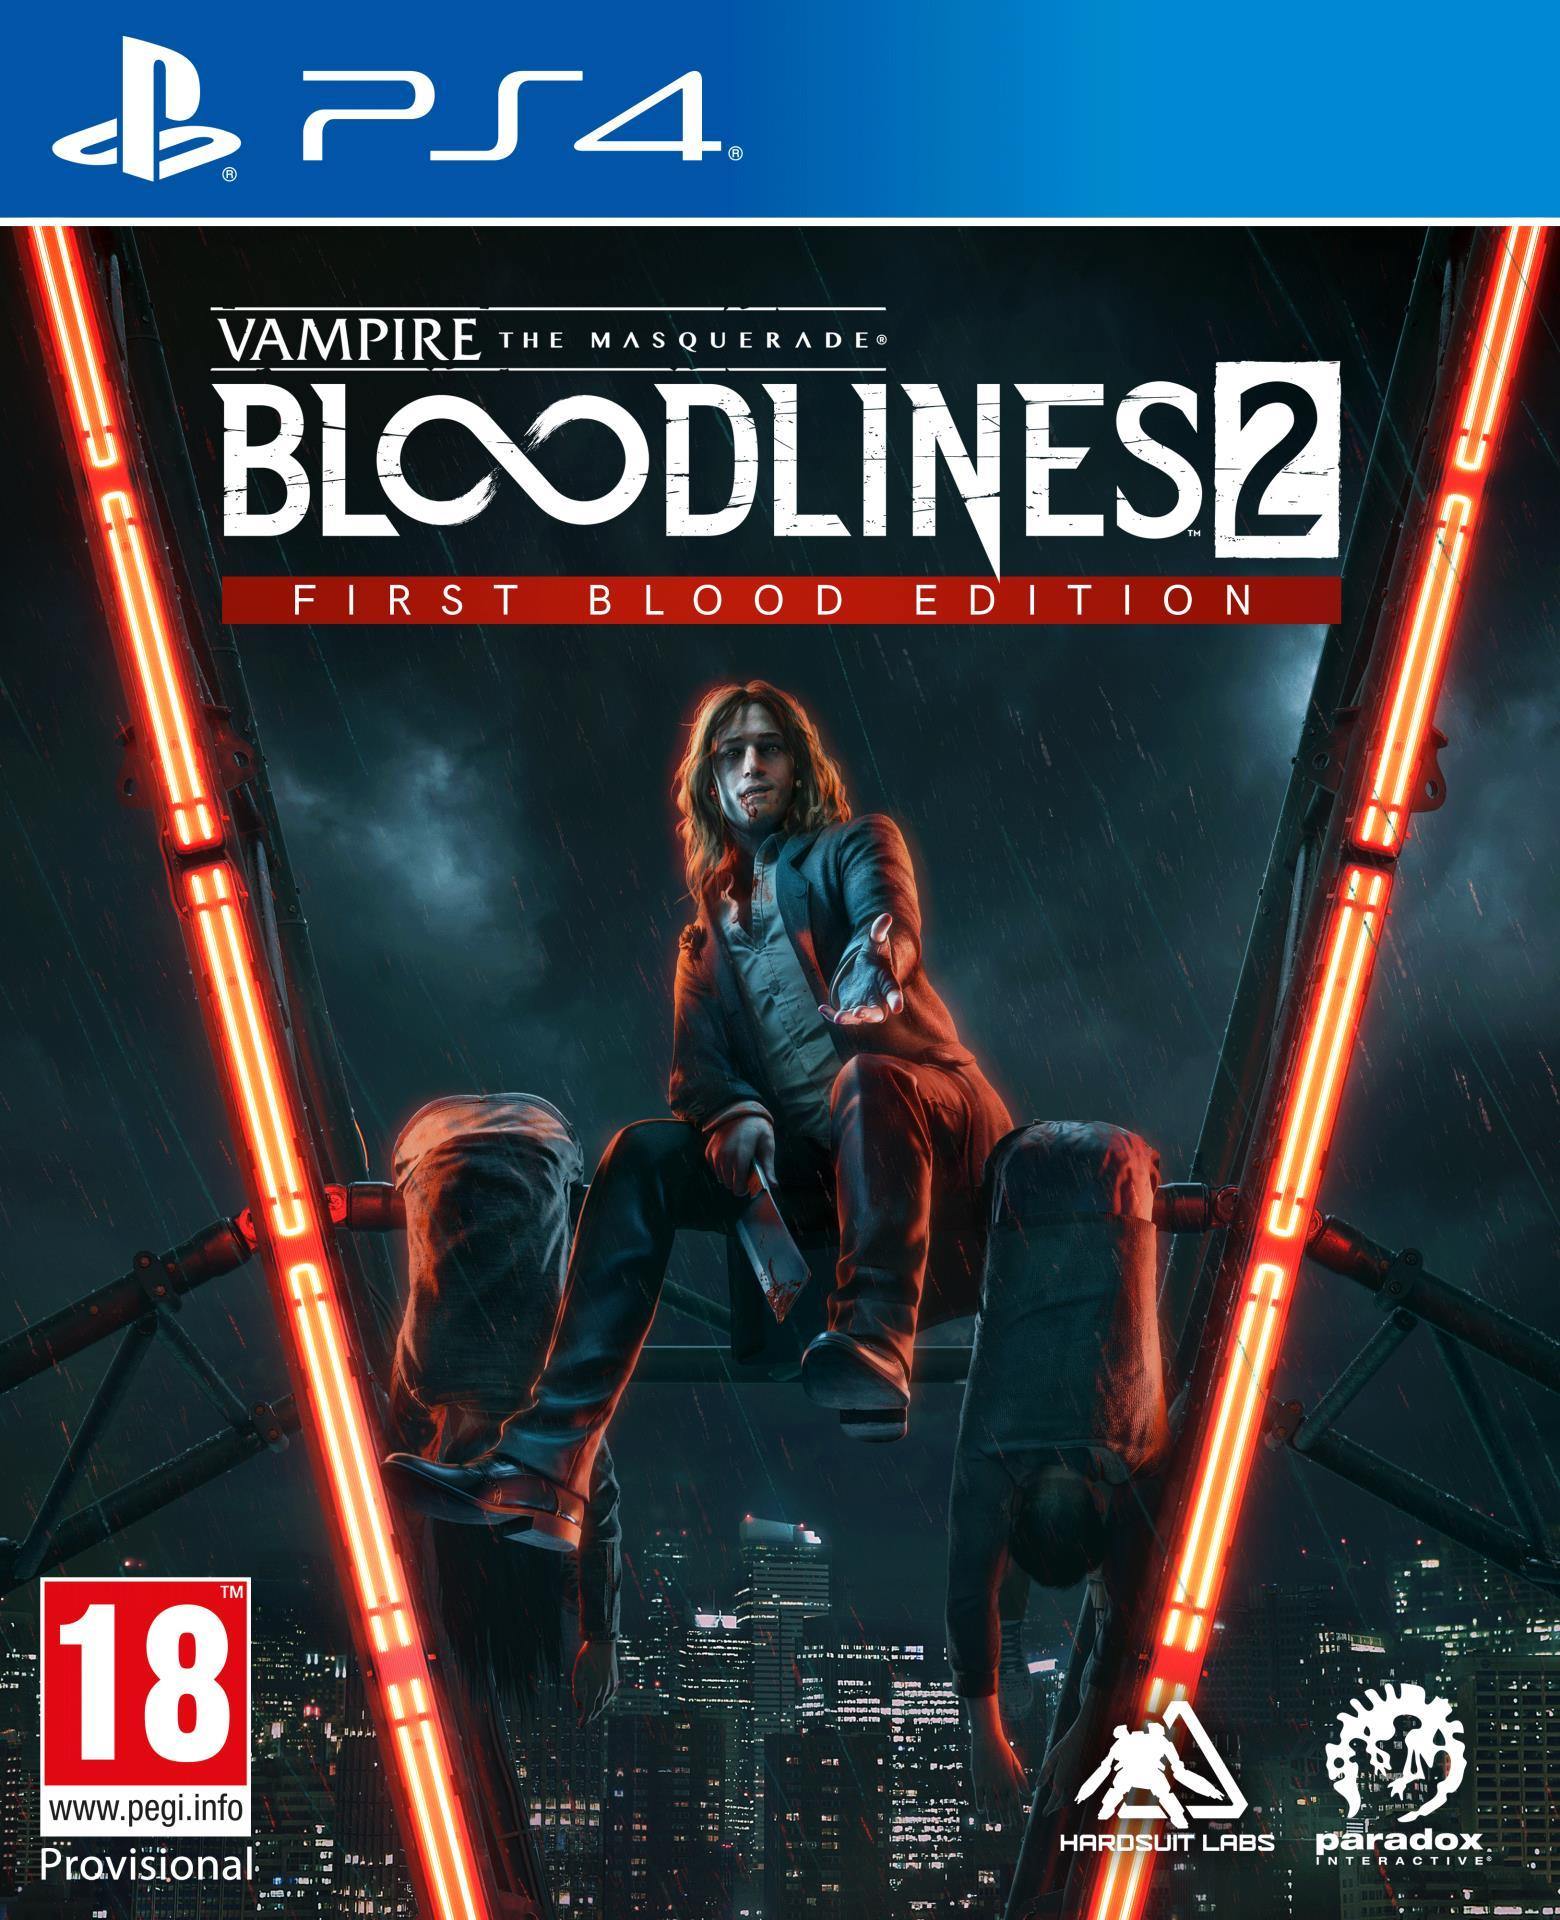 Vampire : The Masquerade Bloodlines 2 First Blood Edition (PS4) - flash vidéo